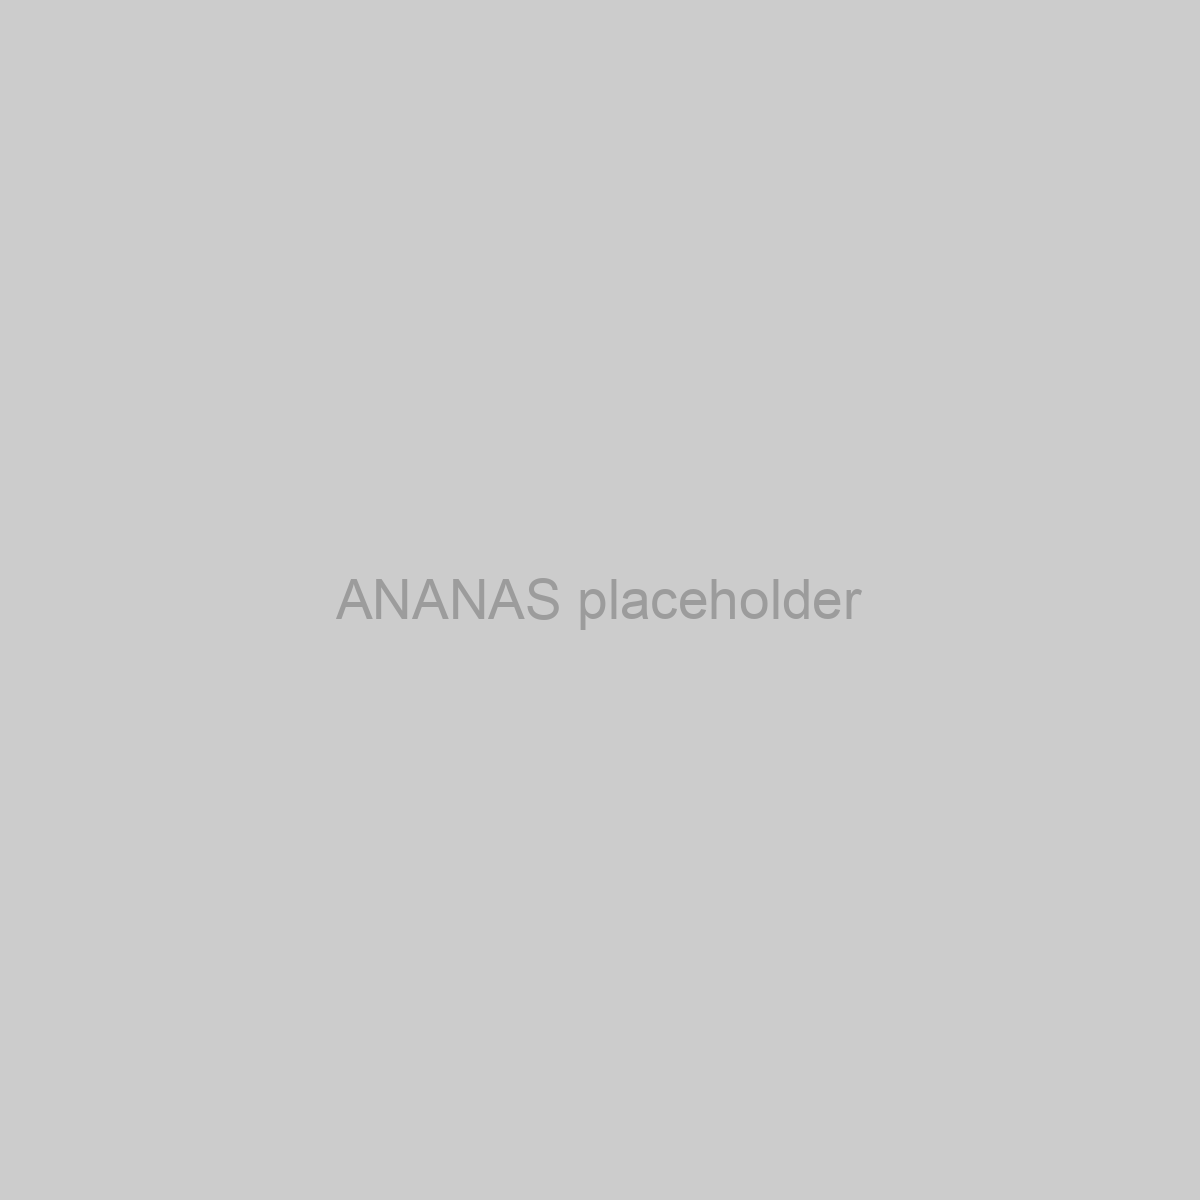 ANANAS Placeholder Image